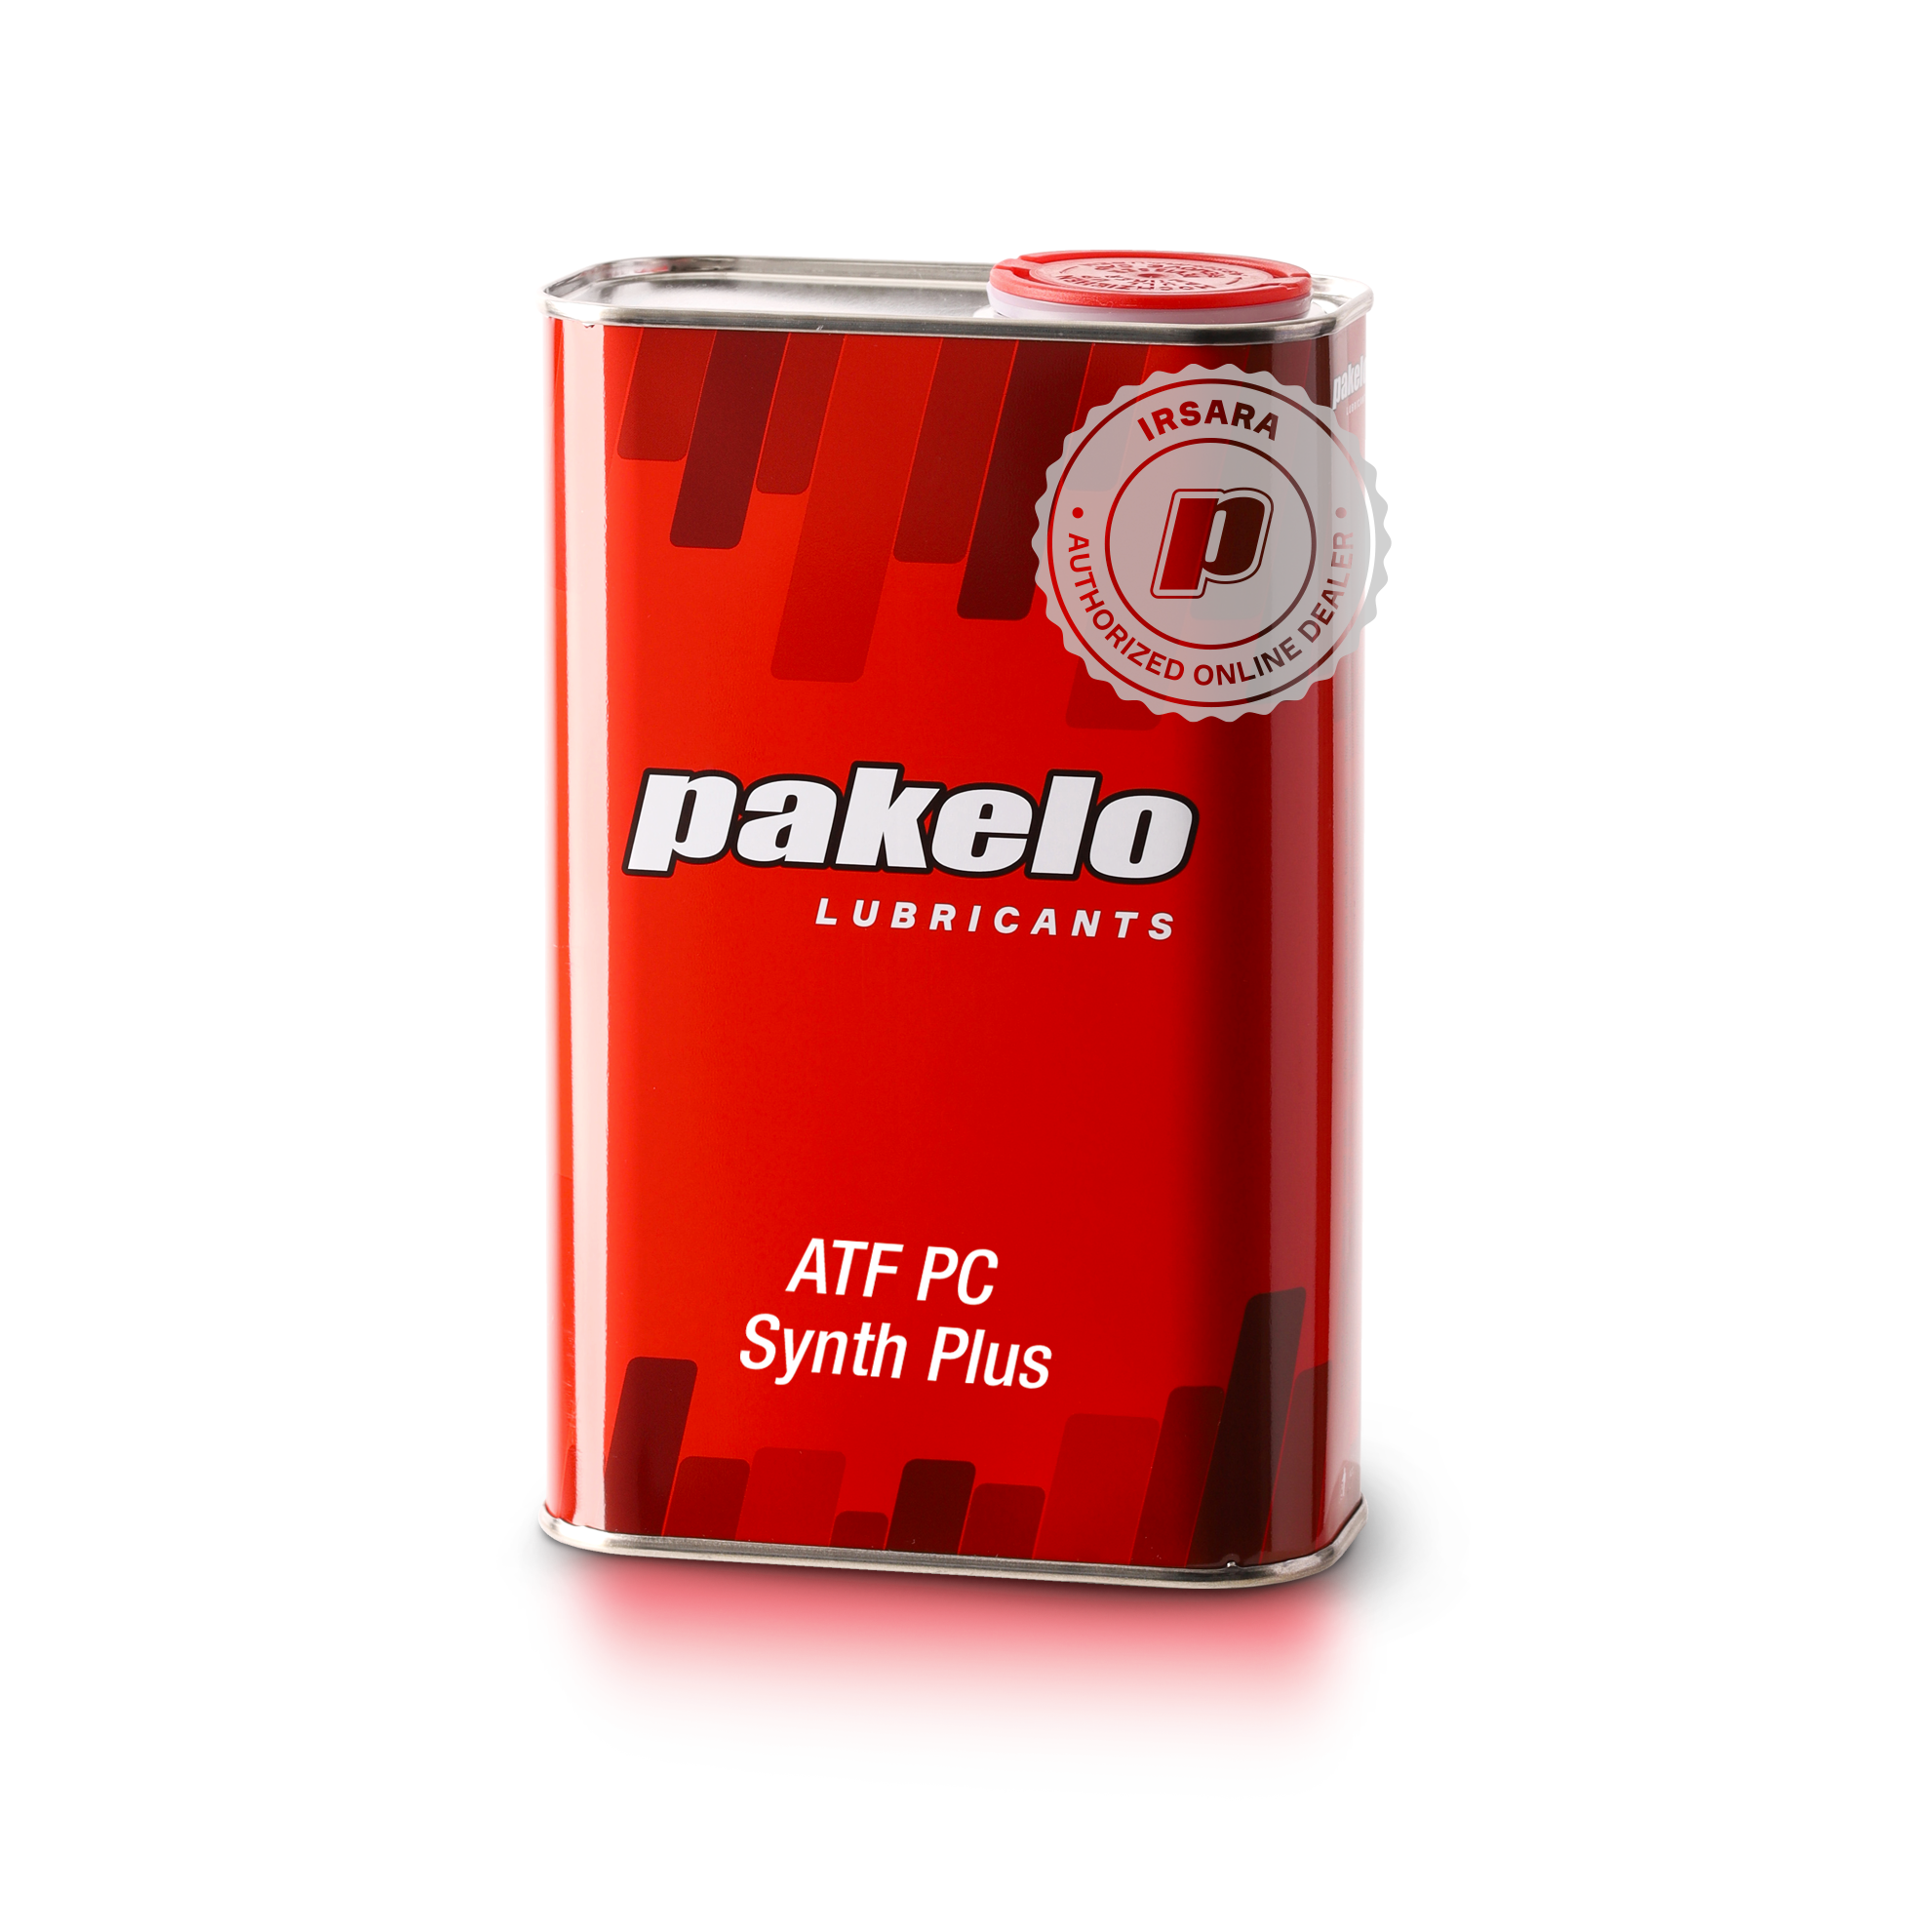 Pakelo Atf Pc Synth Plus (1 Lt)